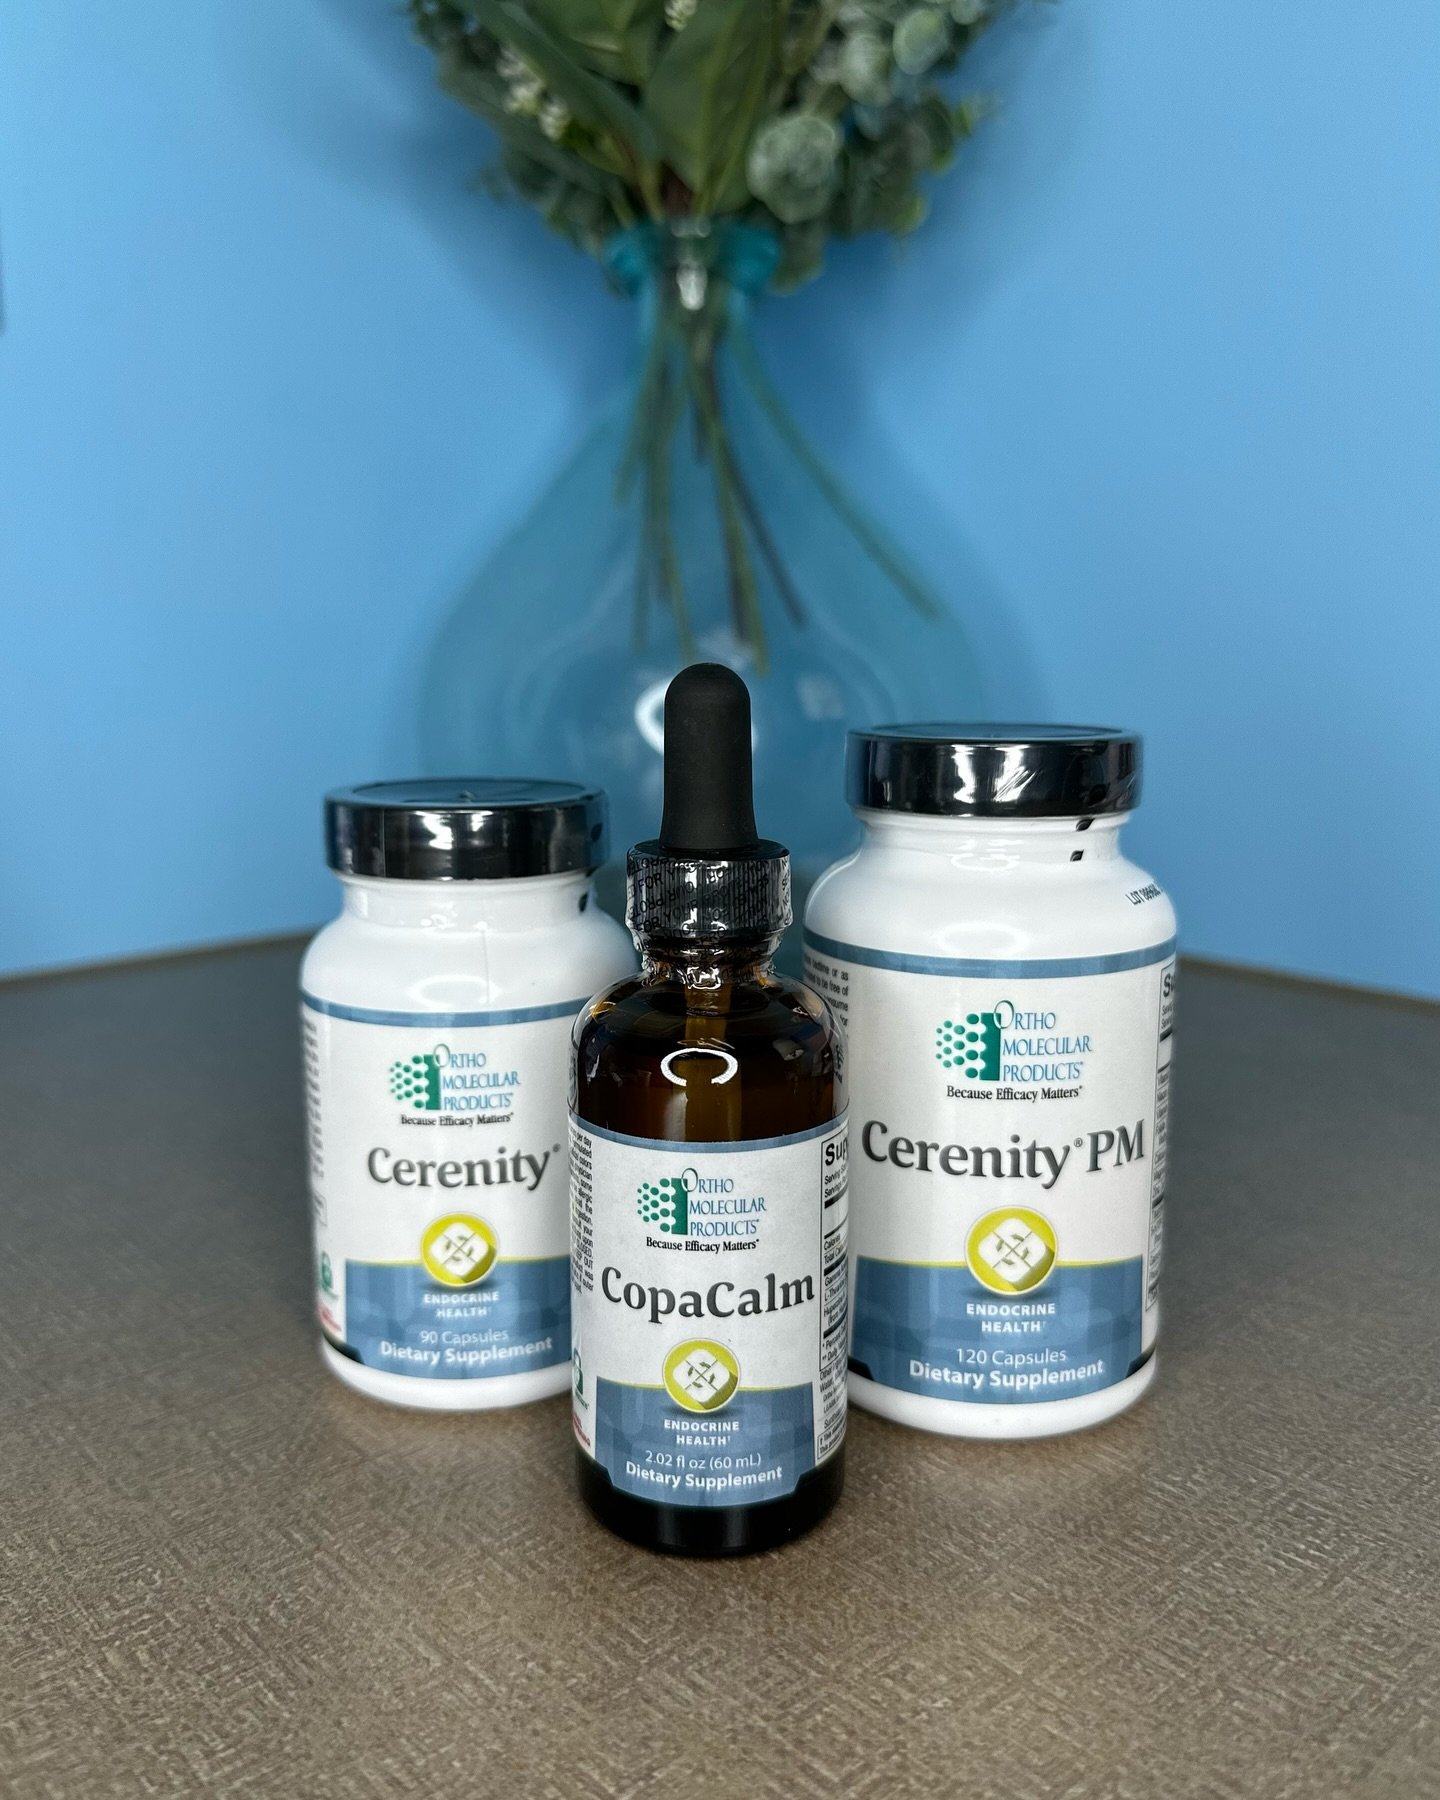 May Specials - 20% OFF!! 
&bull; Cerenity
&bull; CopaCalm
&bull; Cerenity PM
Order on our website - quick shipping!! www.excellforlife.com